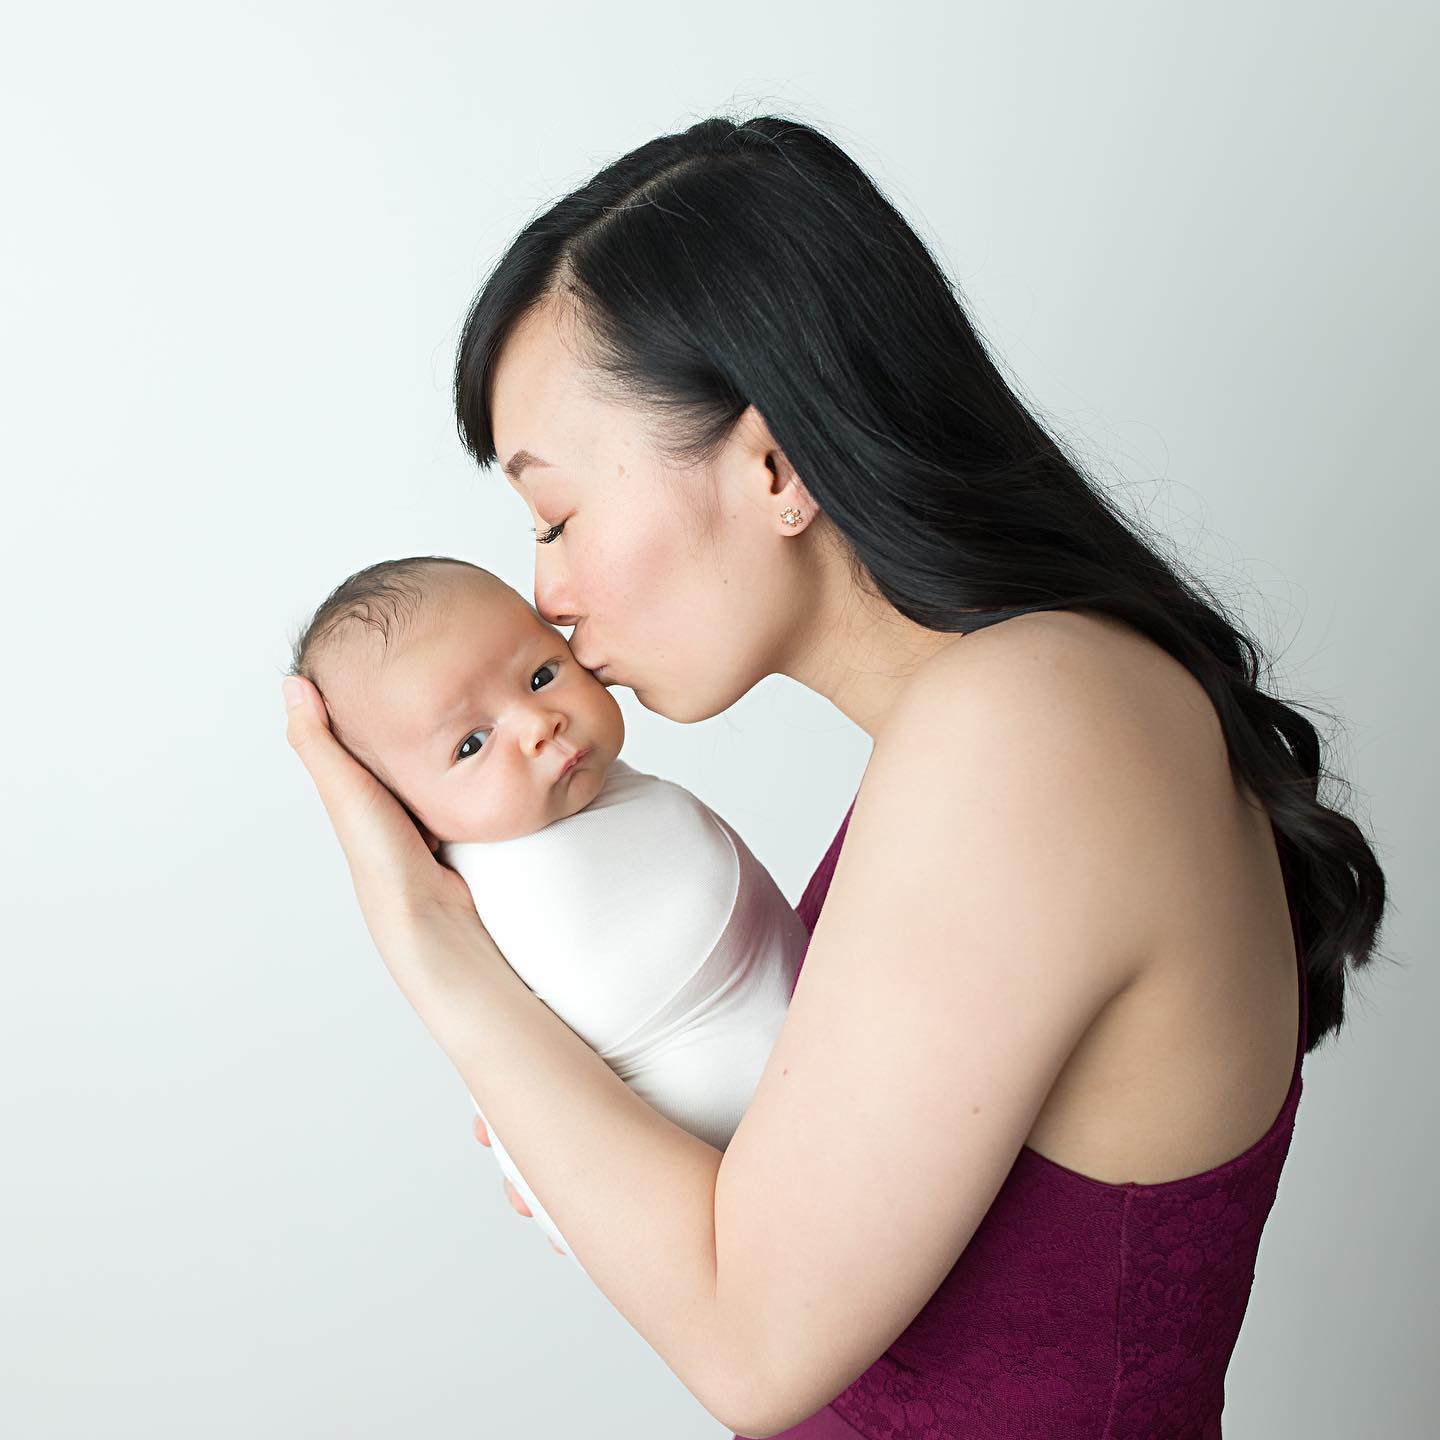 Can you imagine receiving this stunning memory of you and your precious little one? 

Here’s what Mama had to say about her experience: “We had our newborn photos taken with Joelle. I was a little nervous at first as my baby was about a month and thought we had pass that window of opportunity for newborn photos.
Joelle reassured me that it wasn’t an issue and we will get amazing shots regardless. Needless to say she was right! Joelle took the time to go over ideas and themes we had in mind prior to our session.

Joelle was patient and gentle with my baby throughout the entire shoot. She absolutely adores what she does and you can see her talent and passion through her work. If you want sweet, personalized and lasting precious shots of your newborn you won’t regret booking a shoot with Joelle. We highly recommend her.”

It means so much when clients share their experience with us! Thank you for your kind words. 

#oshawanewbornphotographer #oshawaphotographer #whitbynewbornphotographer #ajaxnewbornphotographer #bowmanvillenewbornphotographer #oshawanewbornphotography #oshawamoms #durhamregionmoms